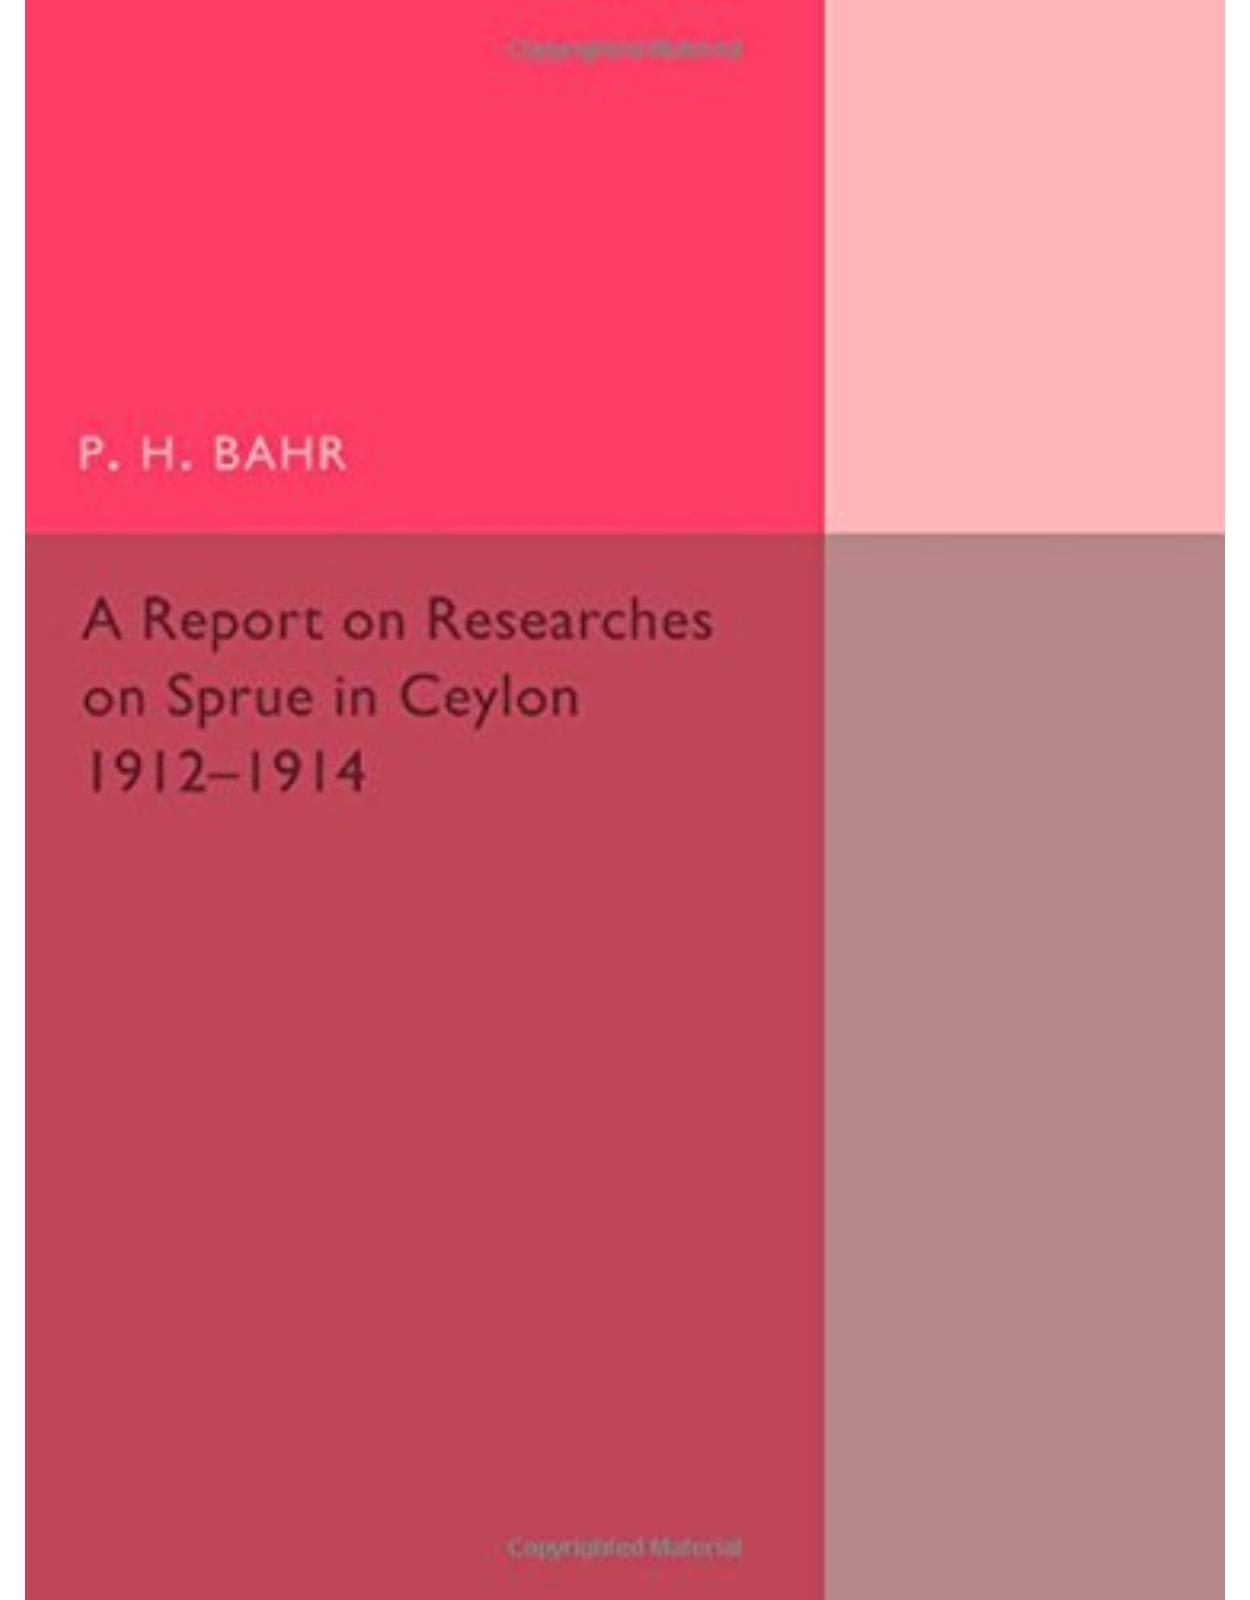 A Report on Researches on Sprue in Ceylon: 1912-1914